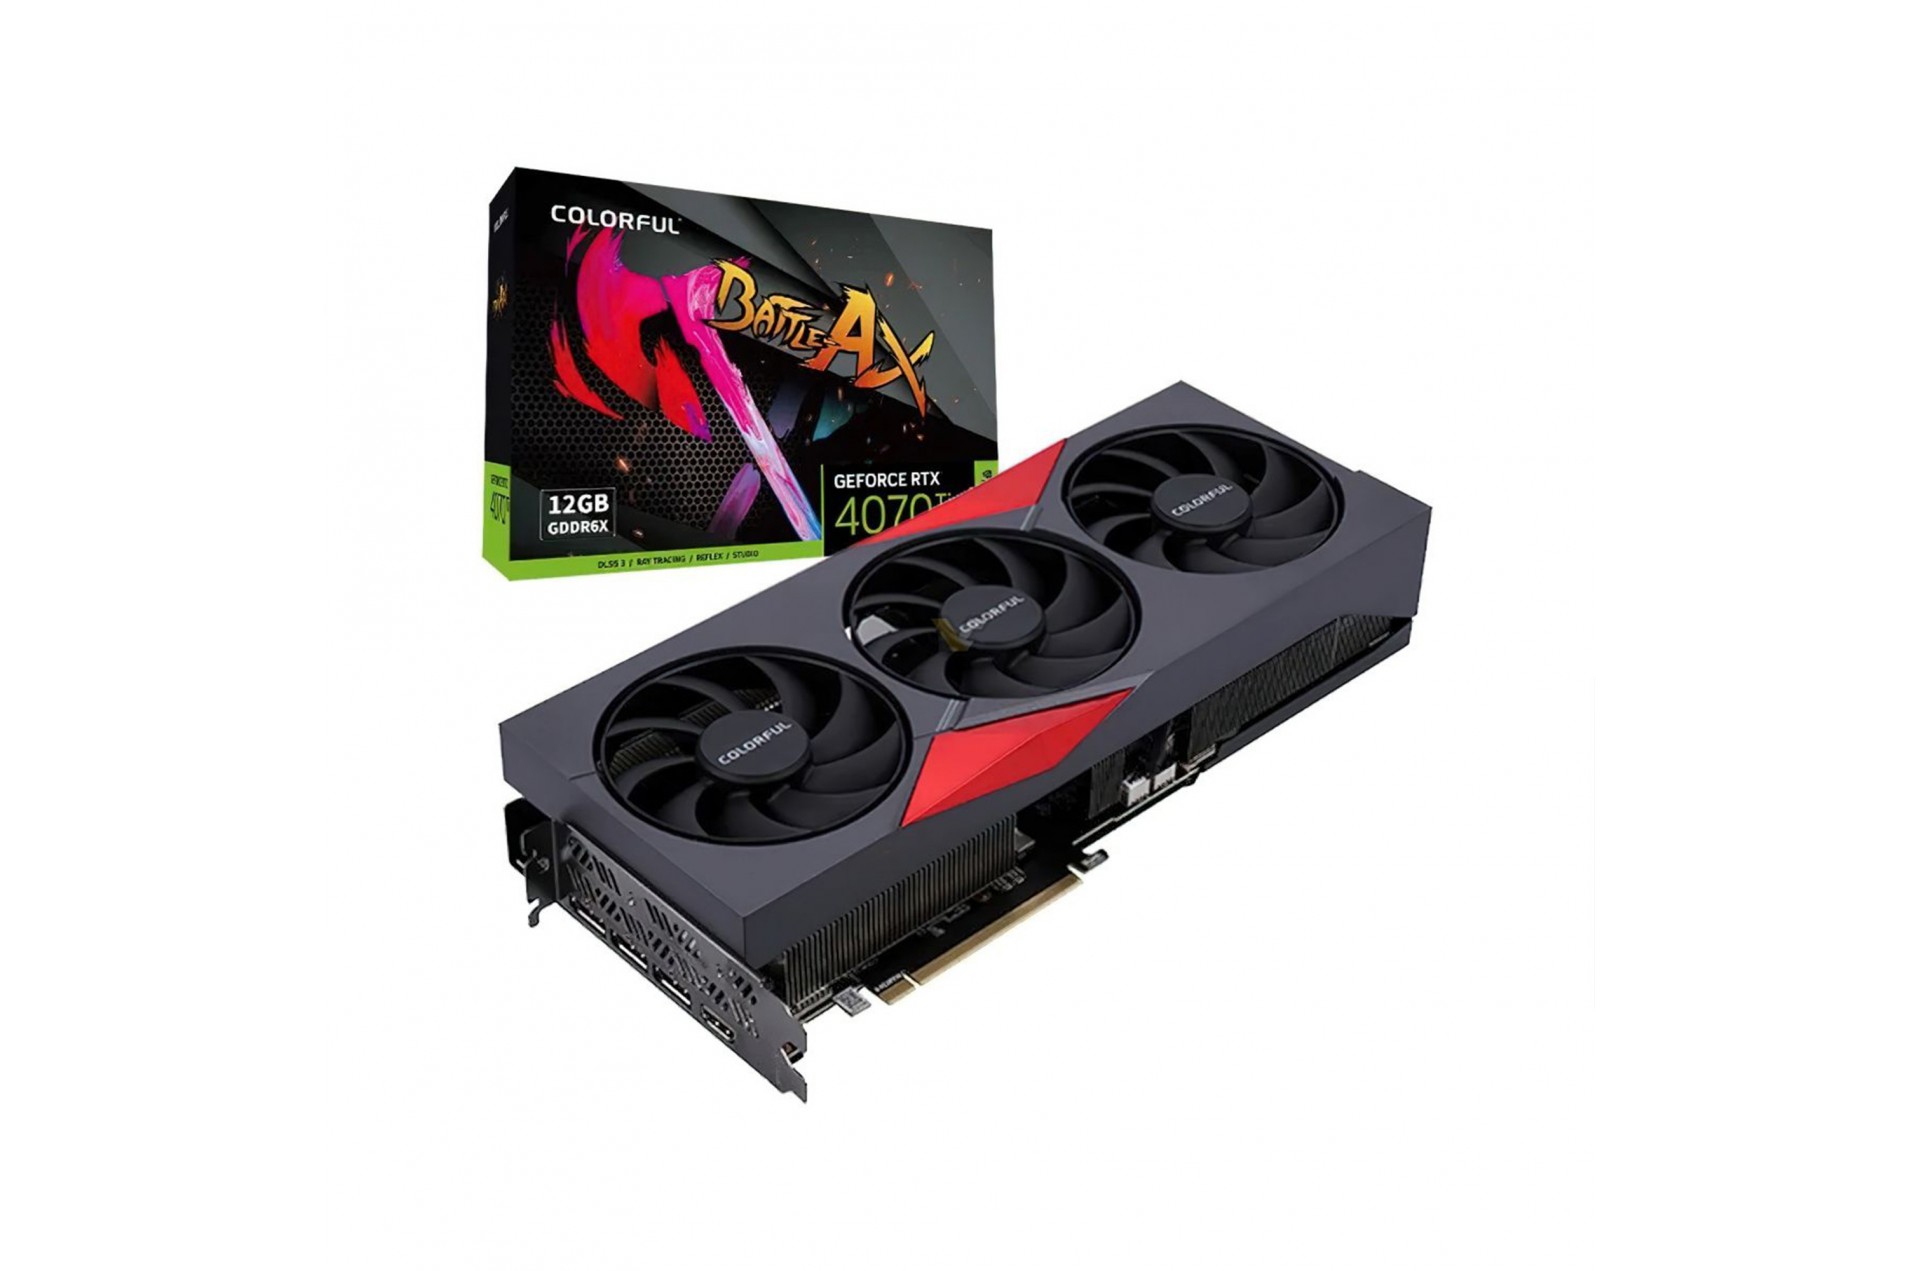 Colorful geforce отзывы. Colorful RTX 4070. Colorful Battle AX 4070 ti. Colorful GEFORCE RTX 4080 Vulcan OC-V 16g. Colorful GEFORCE RTX 4070 ti 12 ГБ обзор.